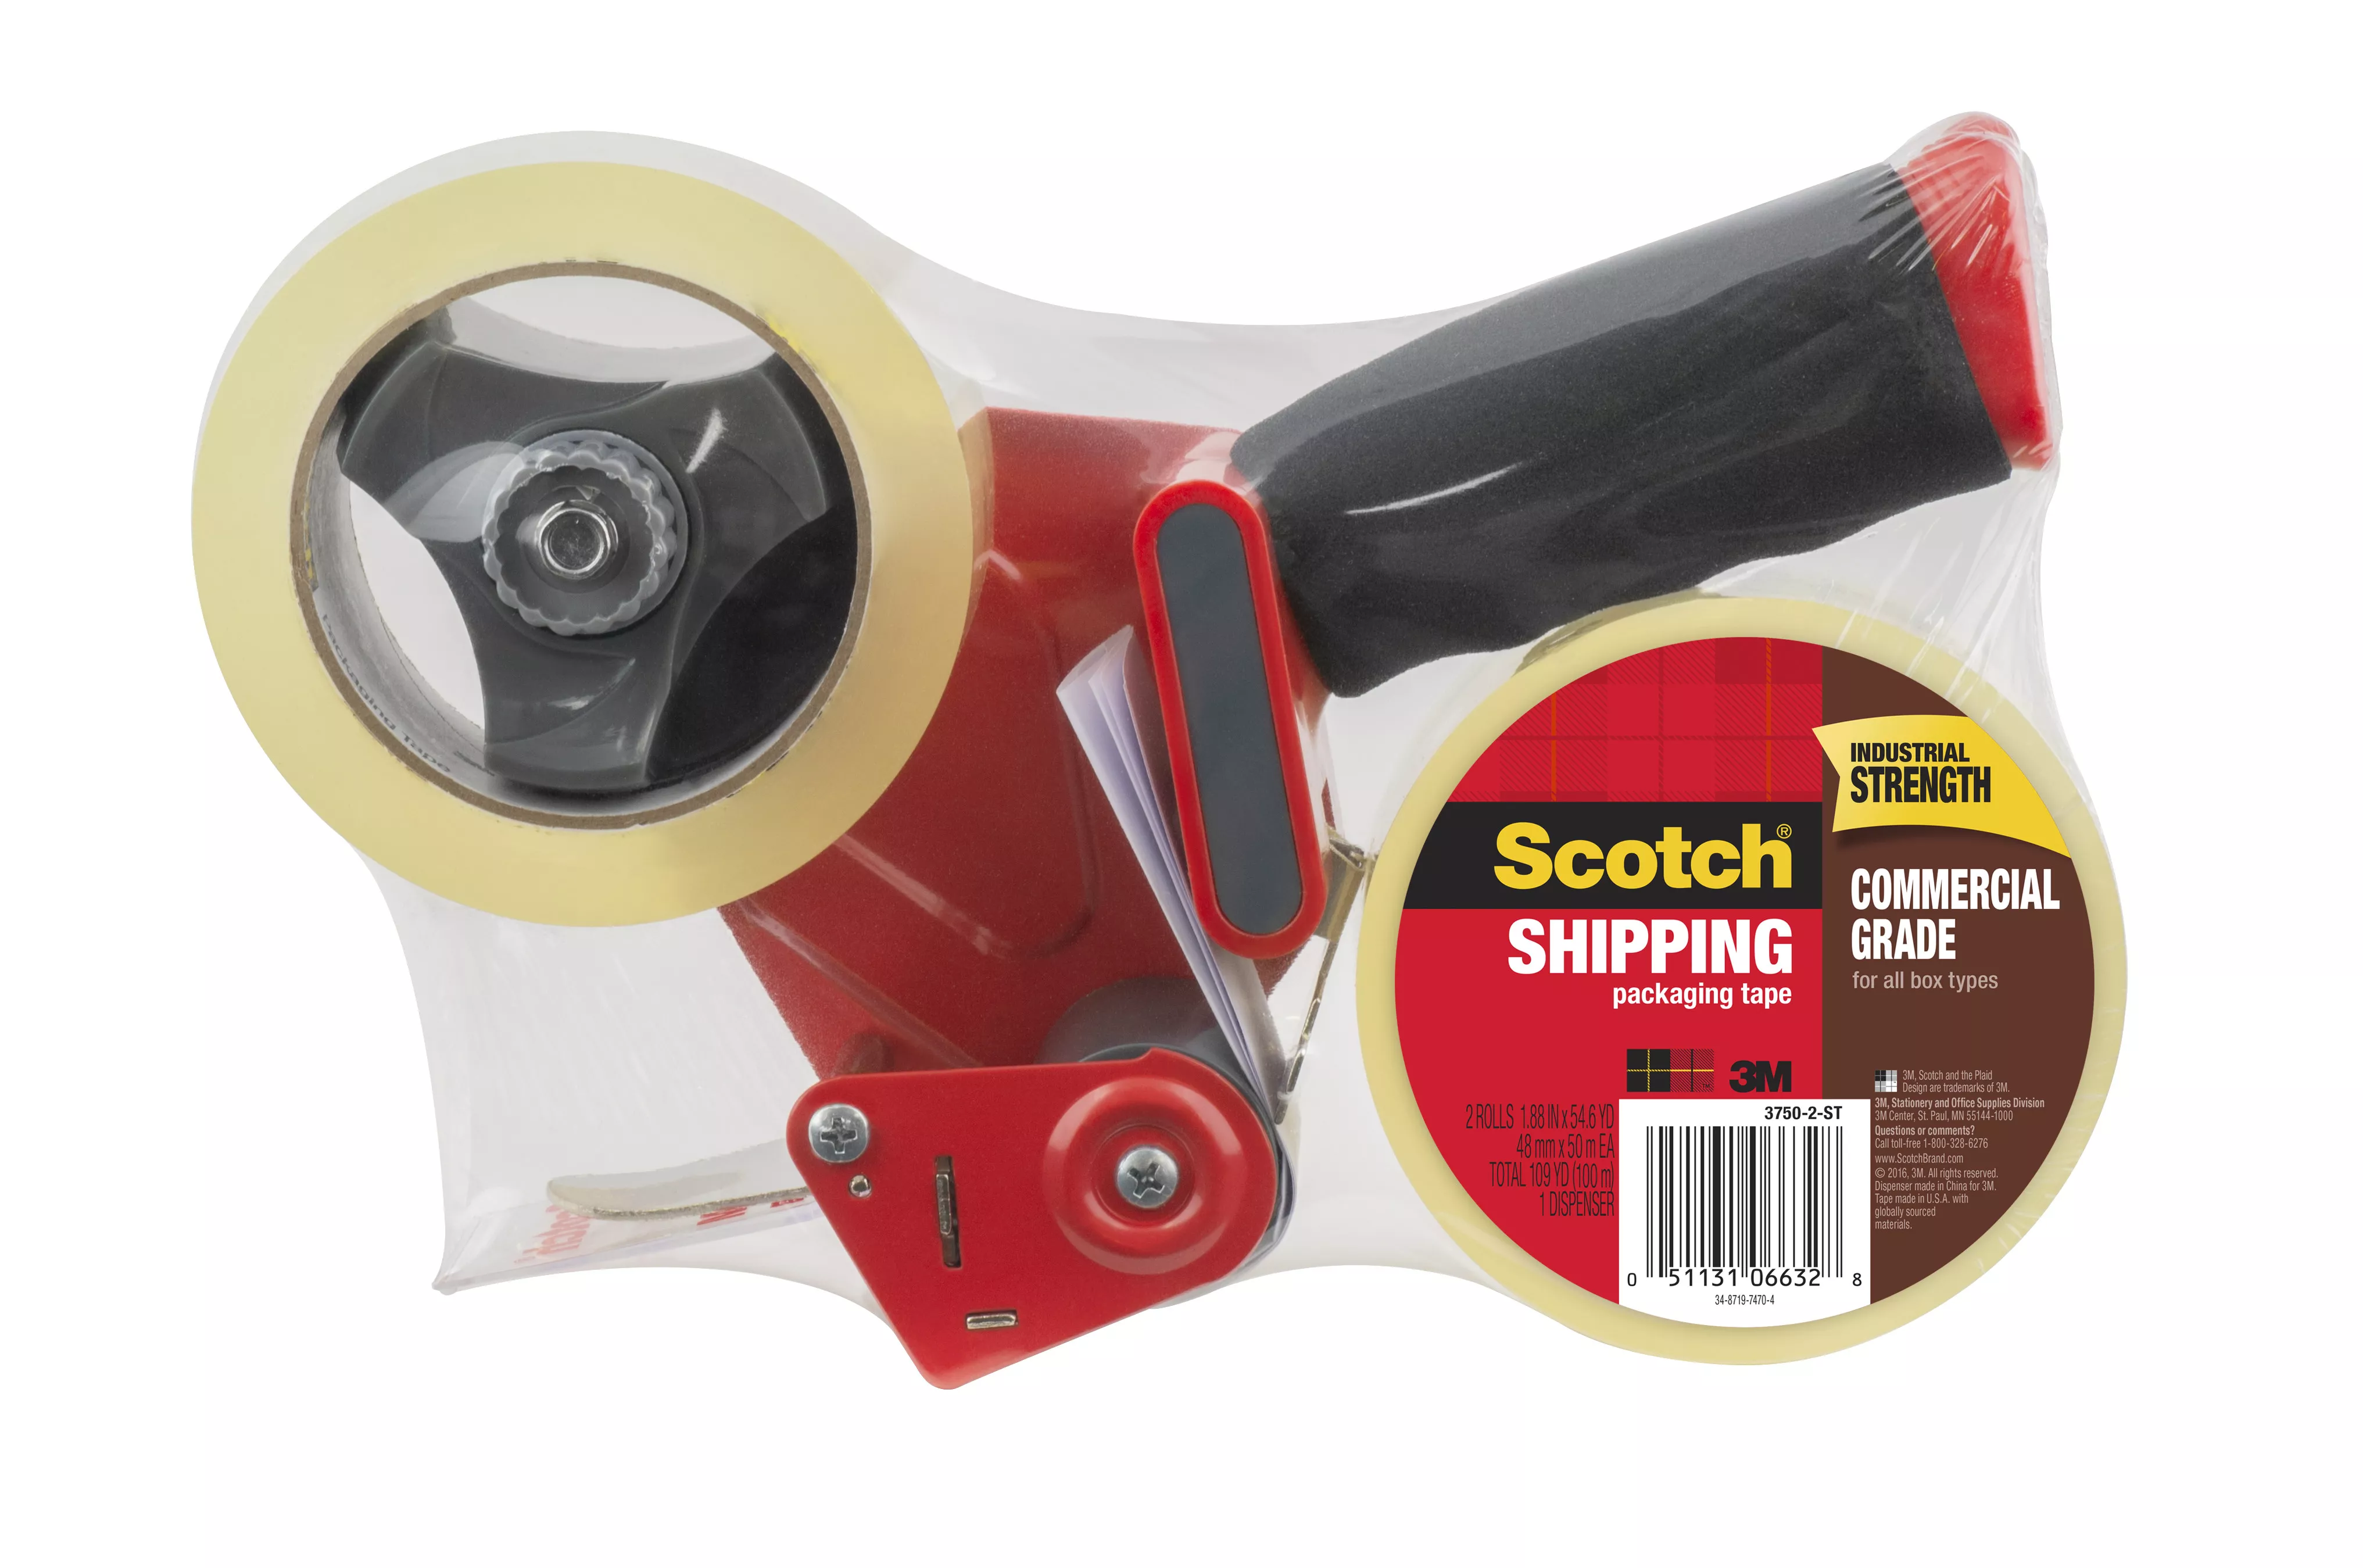 SKU 7100283053 | Scotch® Commercial Grade Shipping Packaging Tape 3750-2-ST